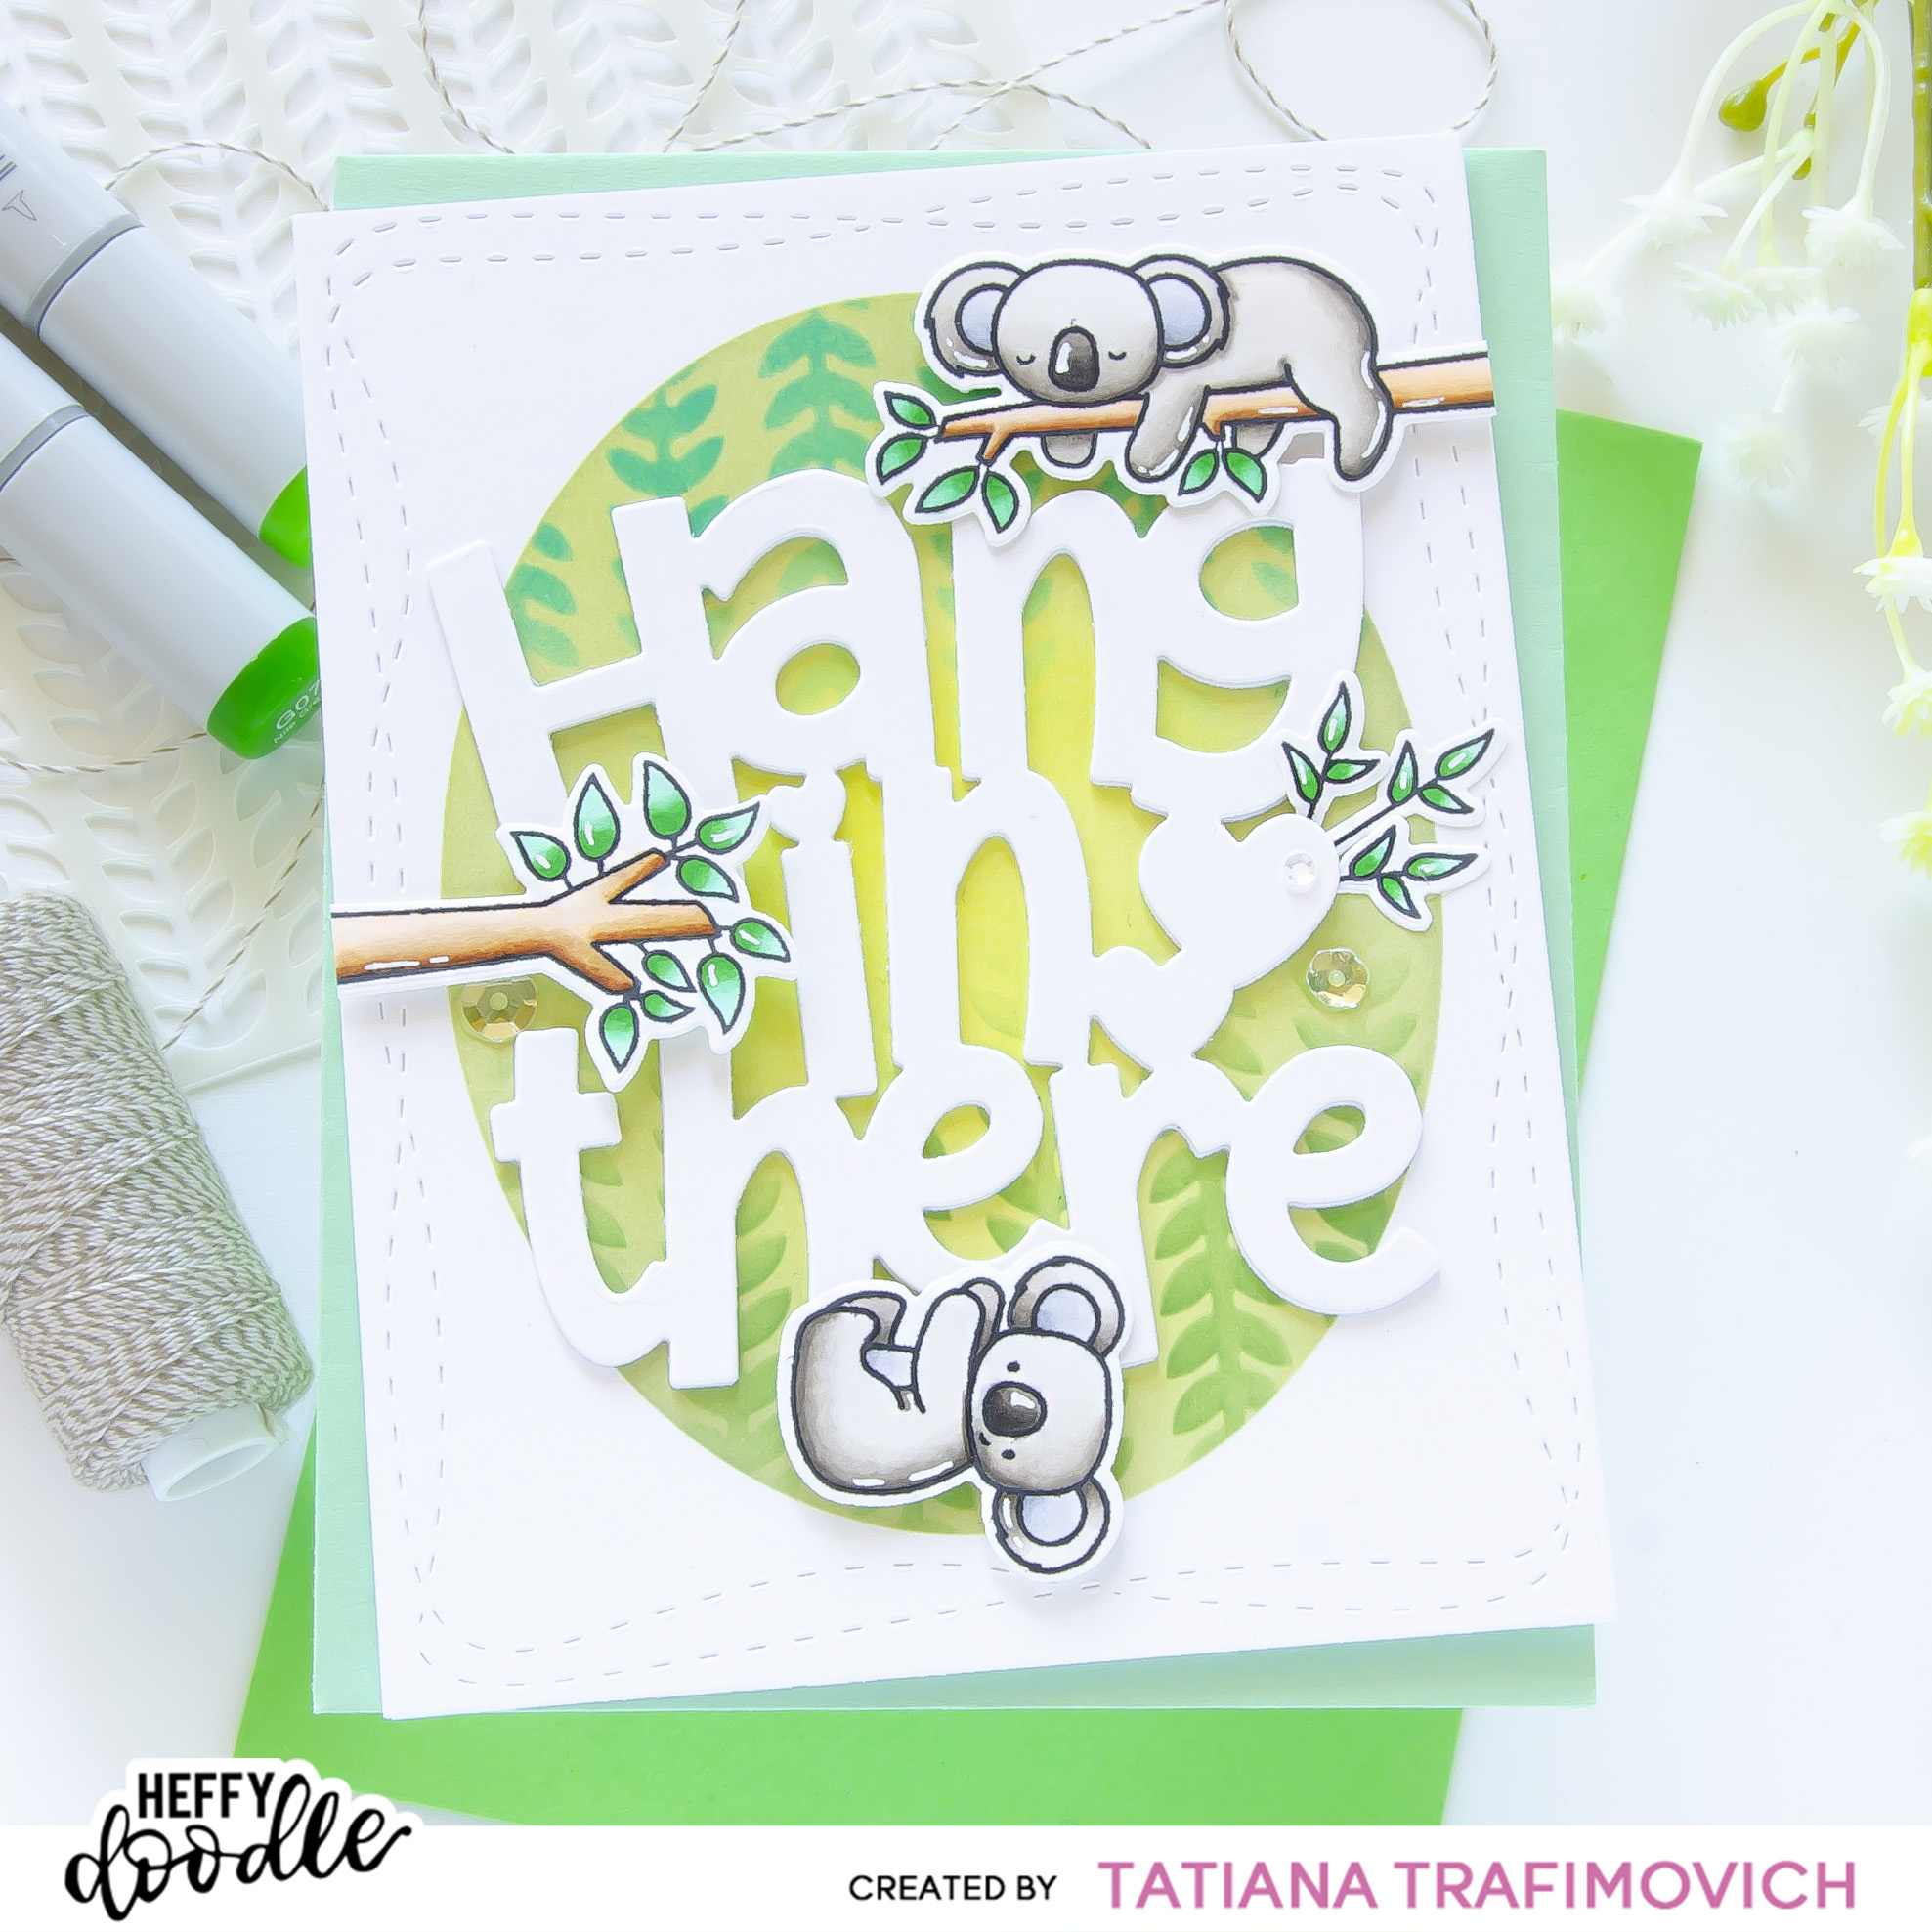 Hang In There #handmade card by Tatiana Trafimovich #tatianacraftandart - stamps and dies by Heffy Doodle #heffydoodle